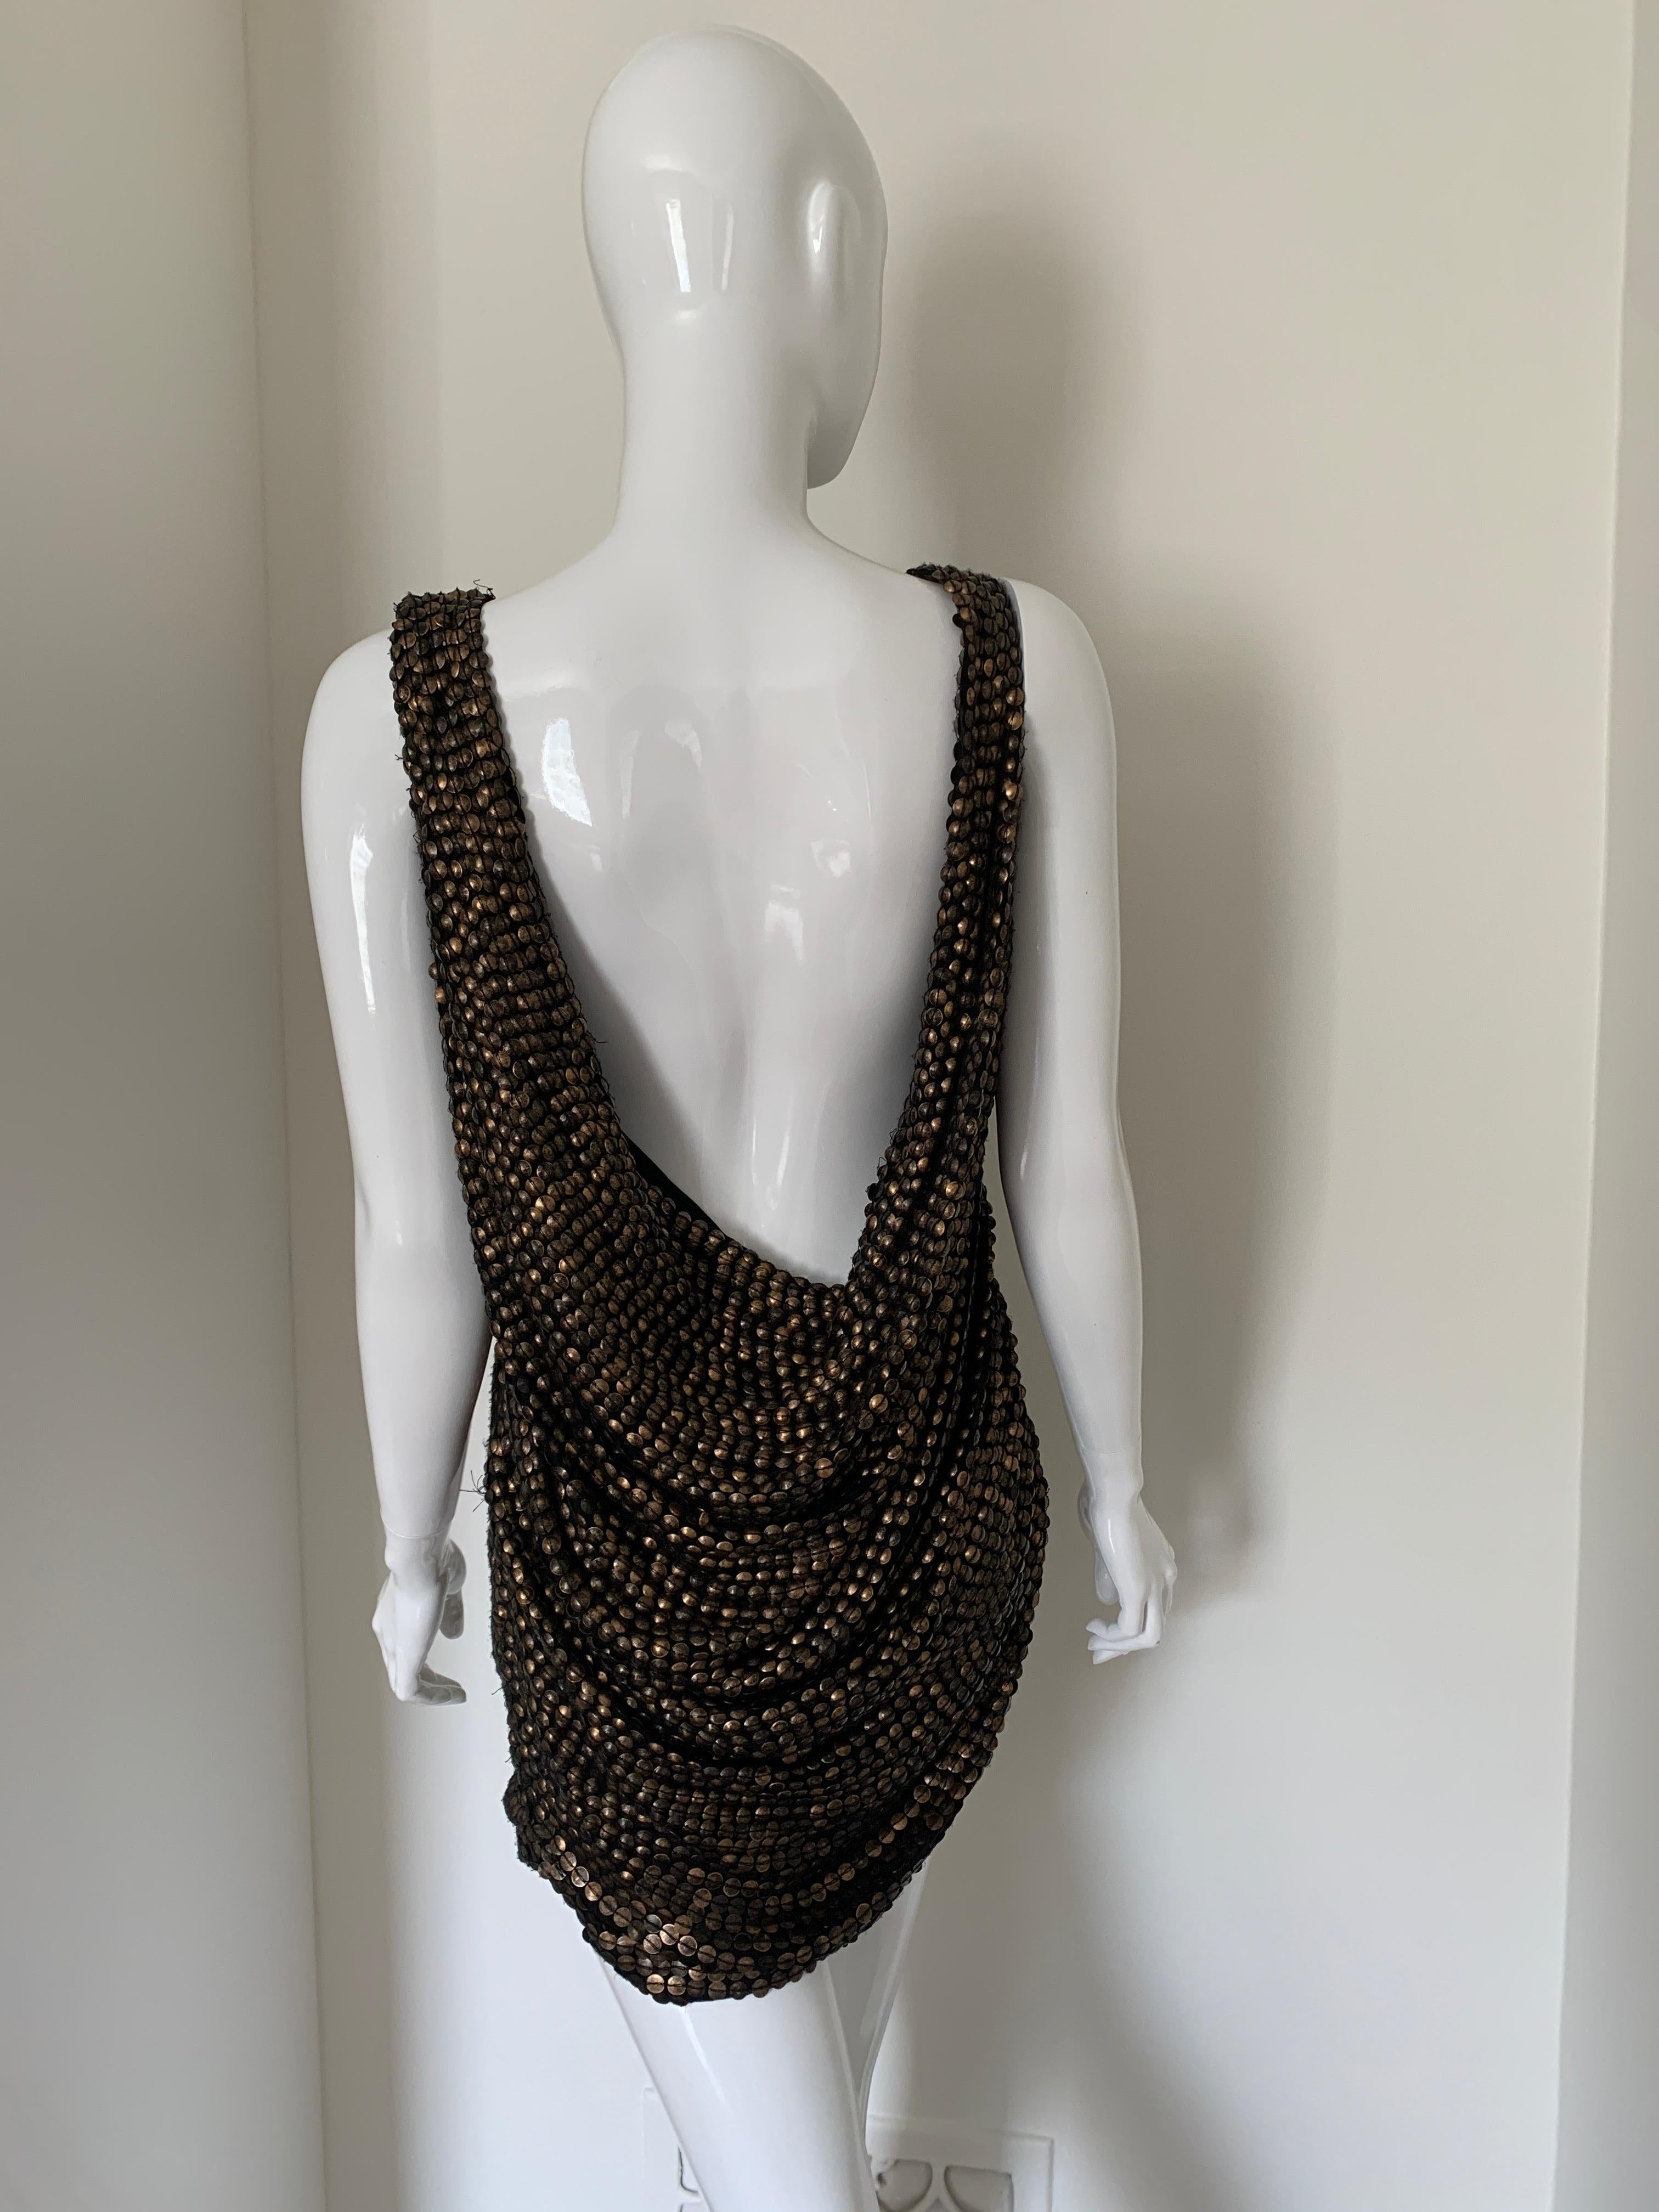 Jay Ahr Black Silk and Brown Sequin Cocktail Dress Size Small. 
High neck with low hanging back. Brown, flat metallic sequins layover black silk to create this truly unique look. 

Double-lined in 100% silk

Tags are still on - but some